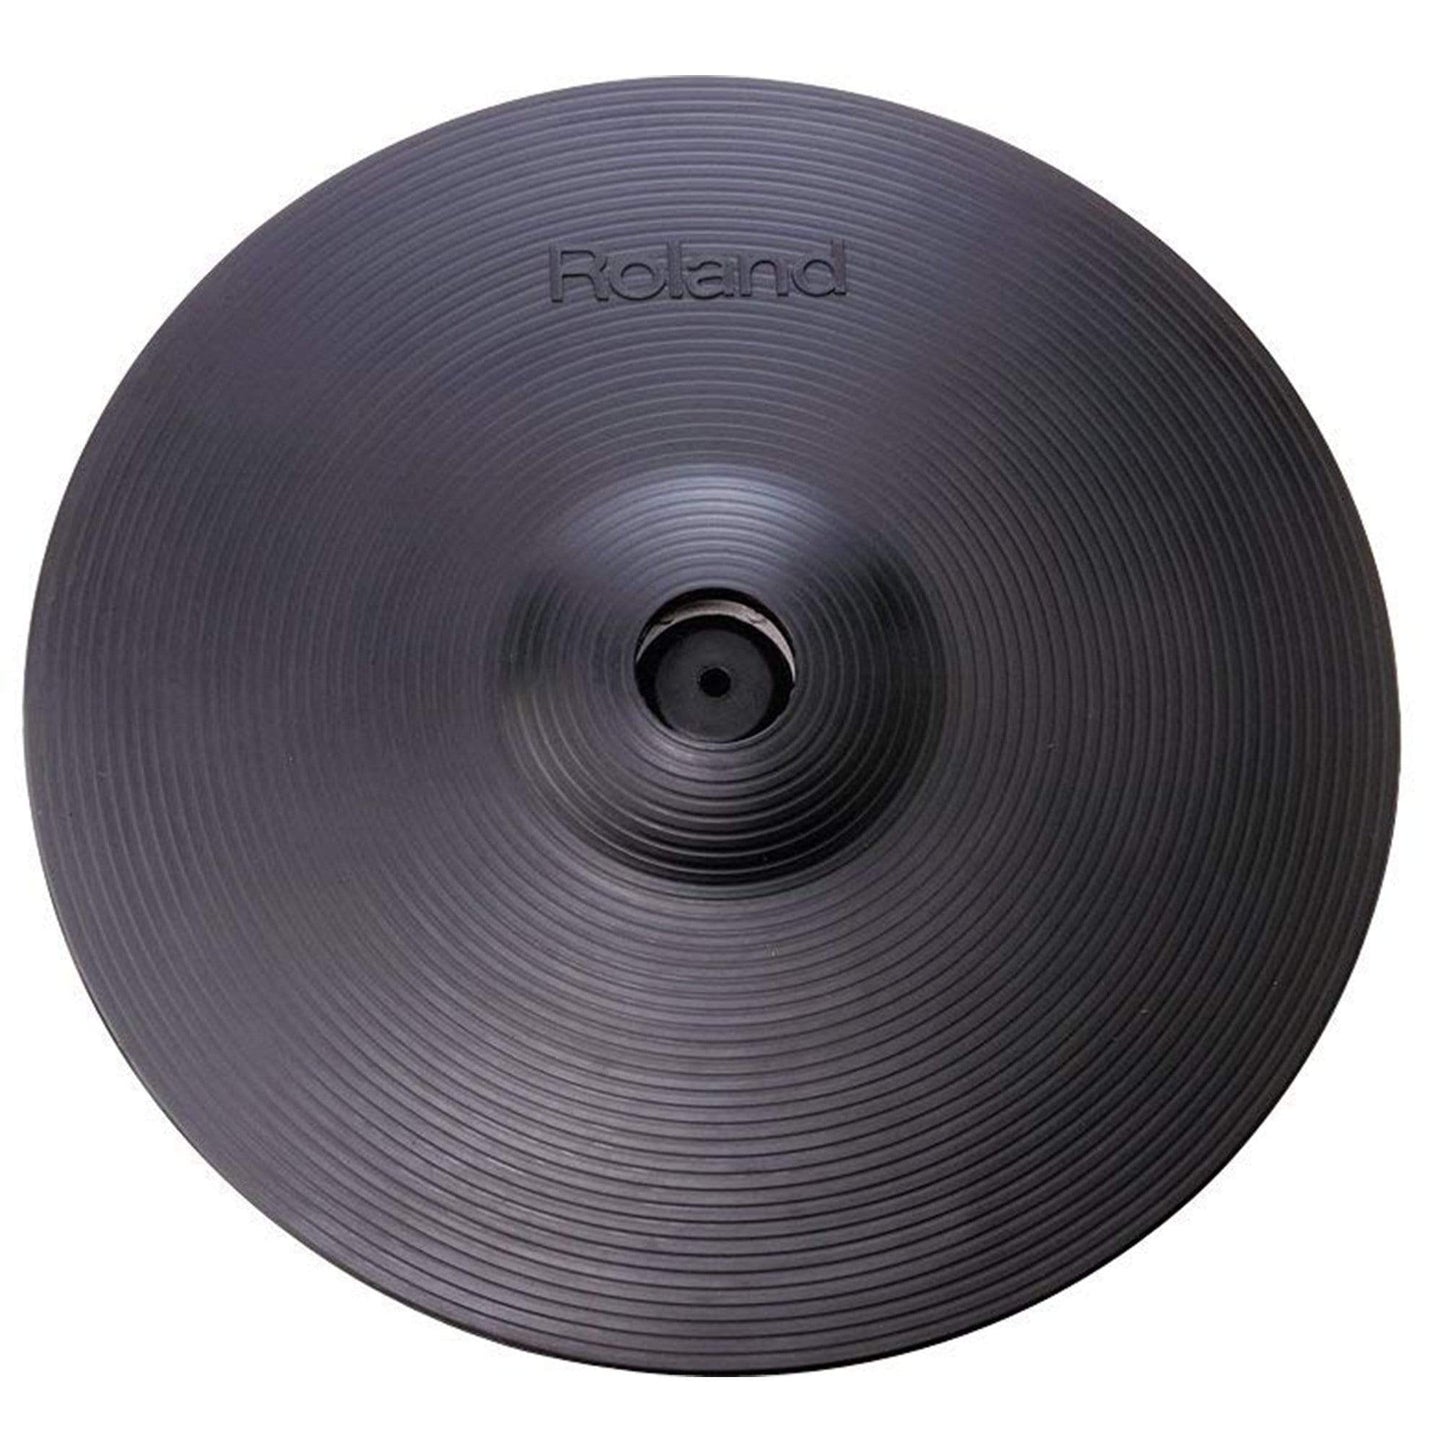 Roland CY15R 15" V-Cymbal Electronic Ride Drums and Percussion / Electronic Drums / Modules